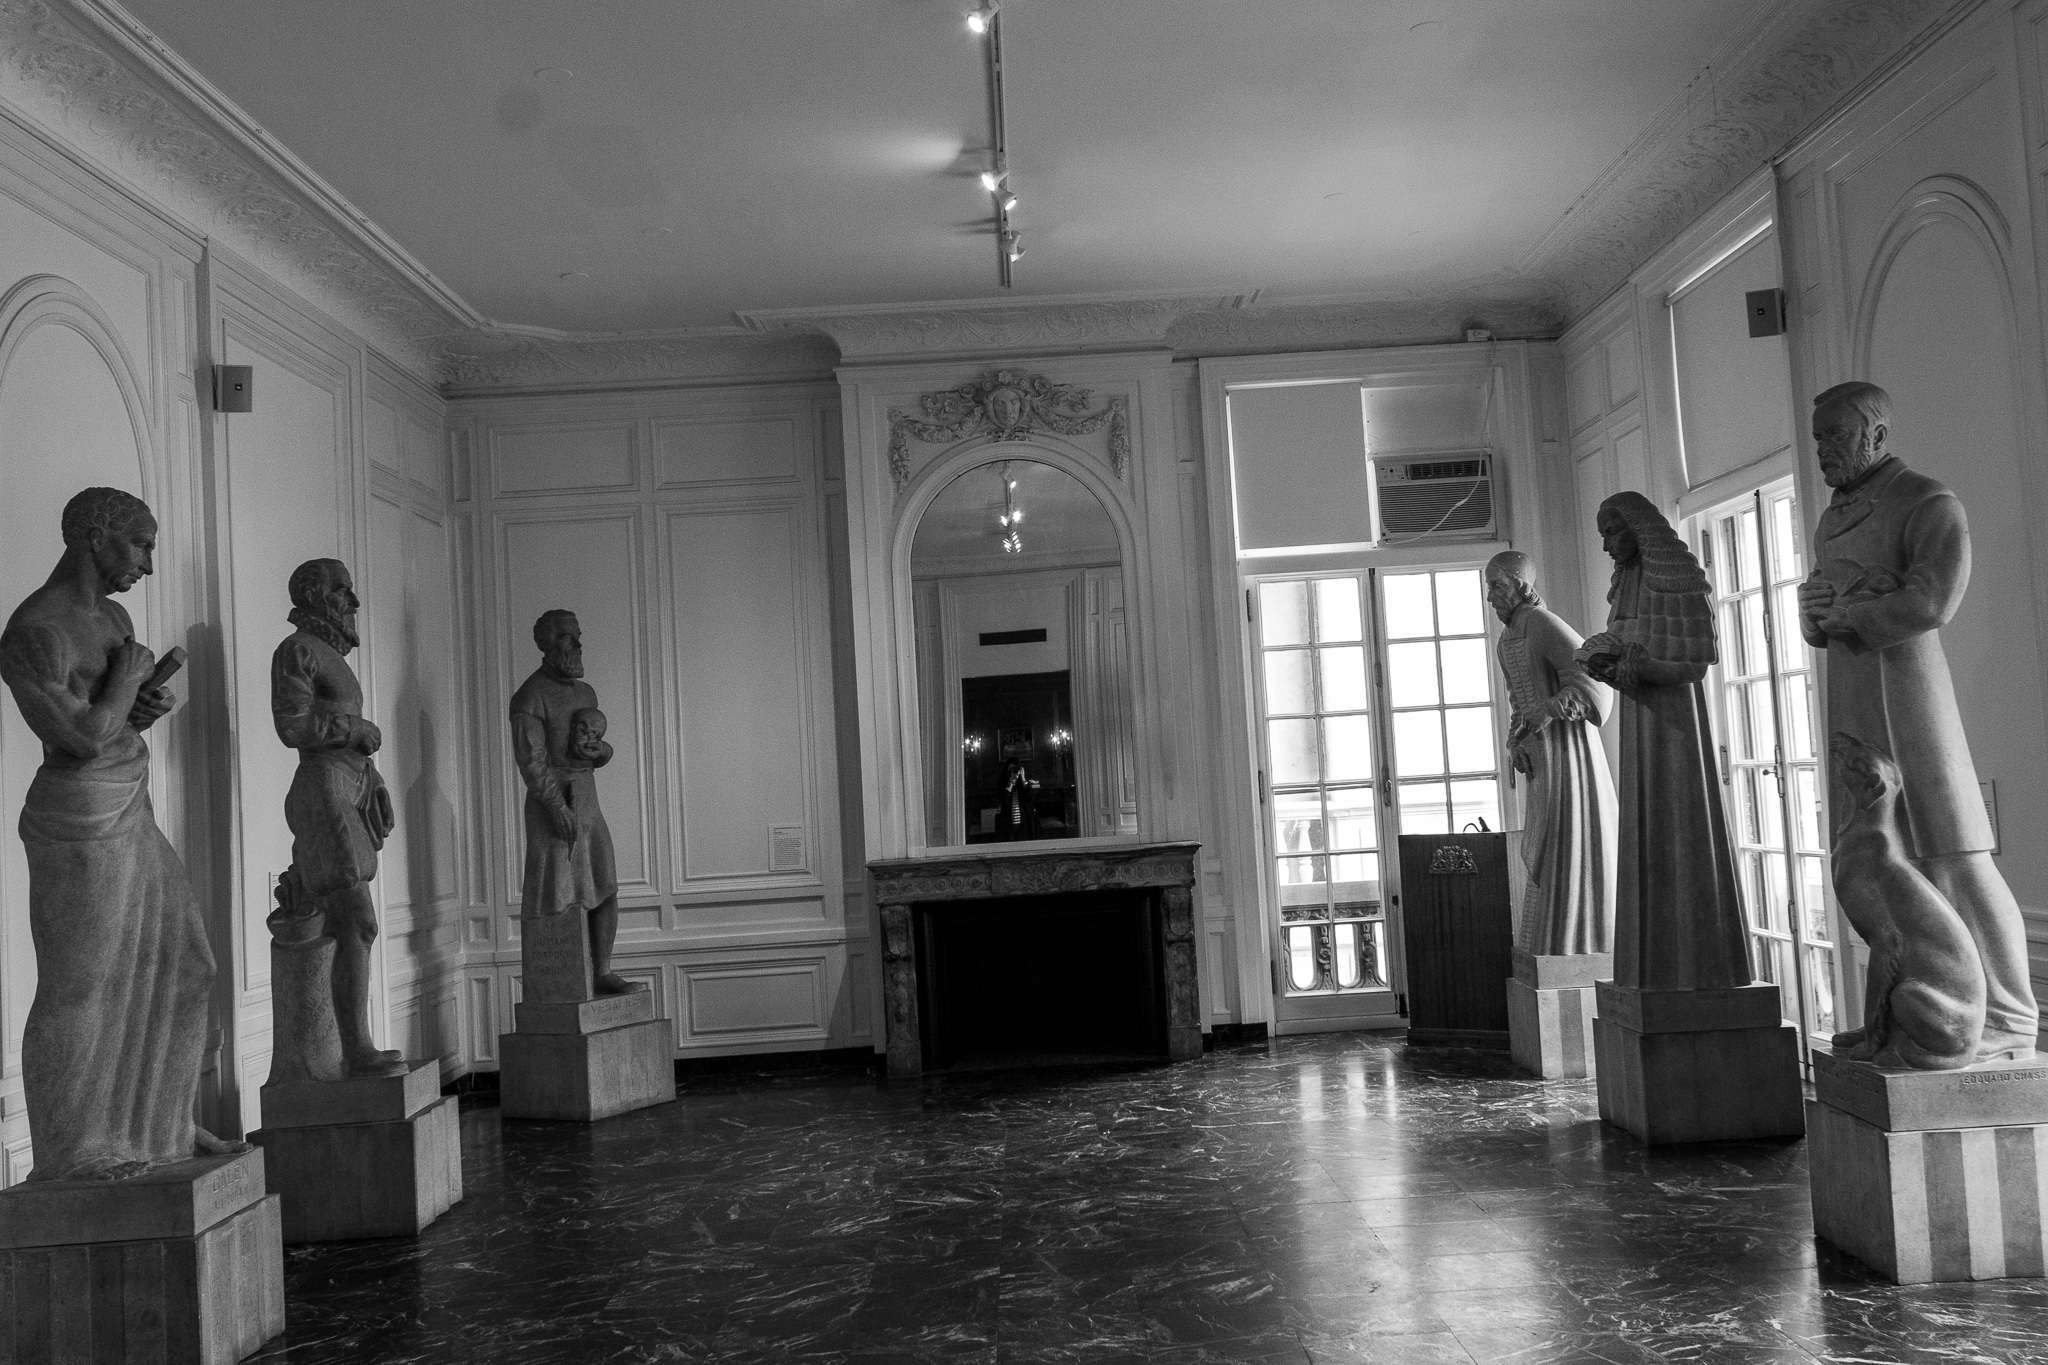 Canted black-and-white image of a large room lined with statues, a black marble floor and in the center a fireplace topped with a mirror, in which the distant image of the photographer is reflected